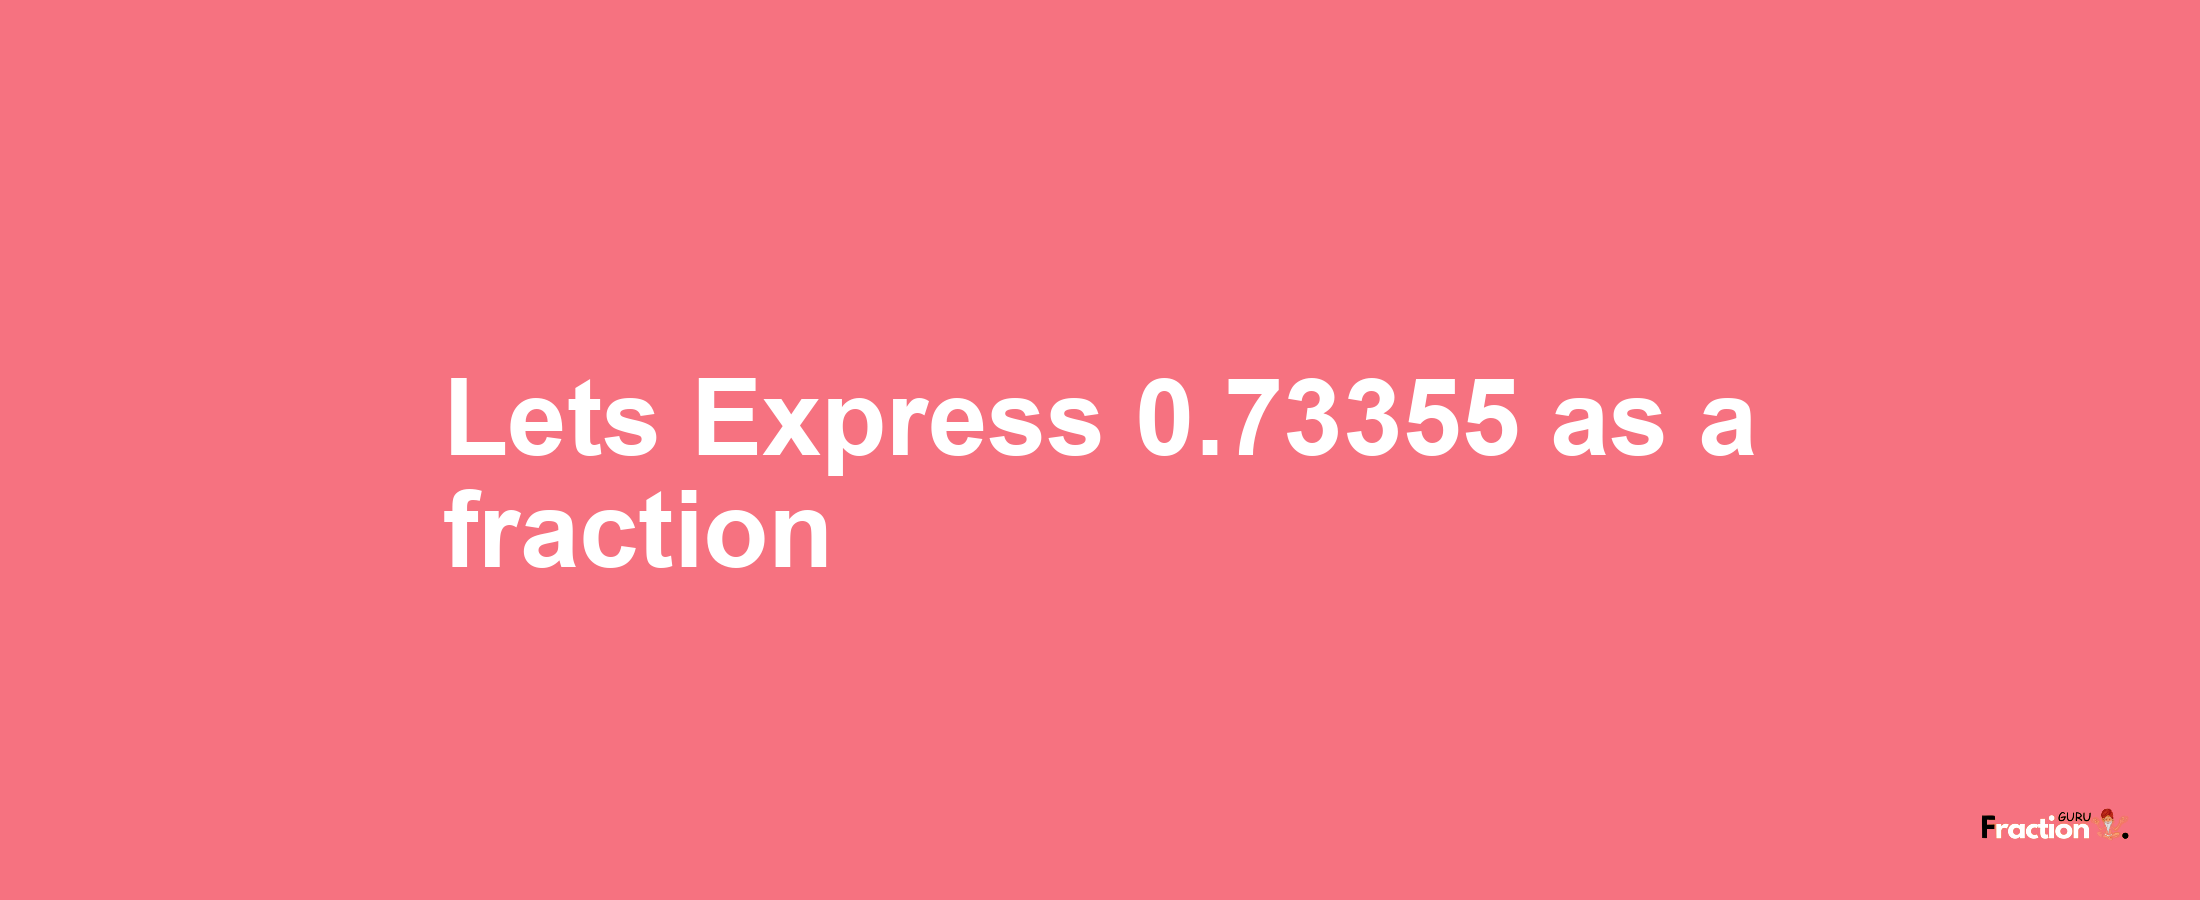 Lets Express 0.73355 as afraction